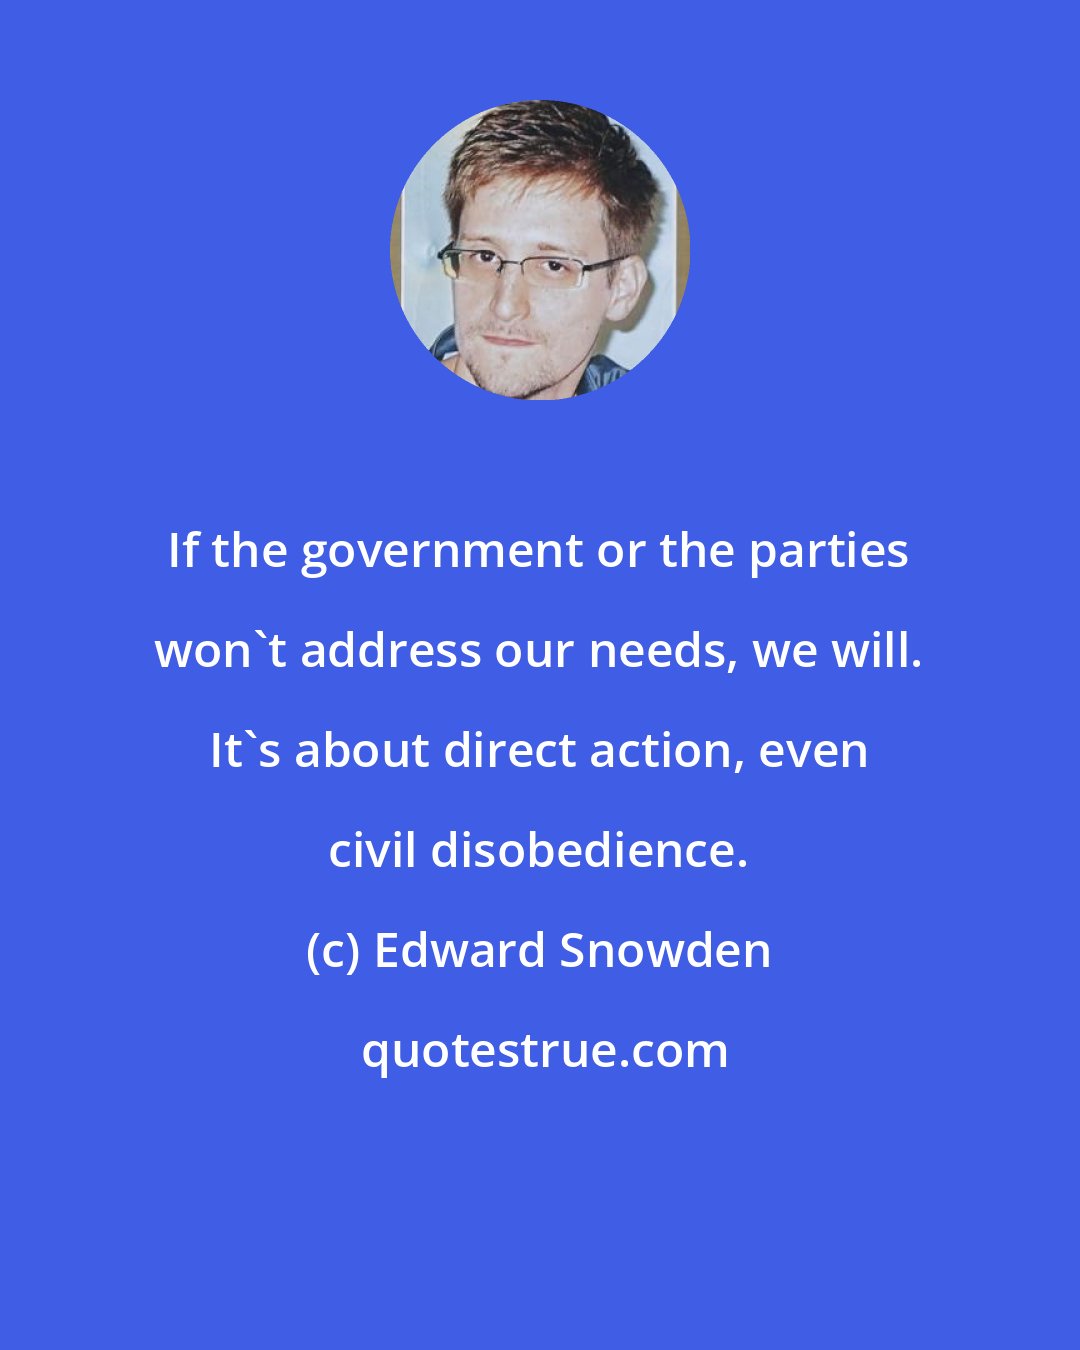 Edward Snowden: If the government or the parties won't address our needs, we will. It's about direct action, even civil disobedience.